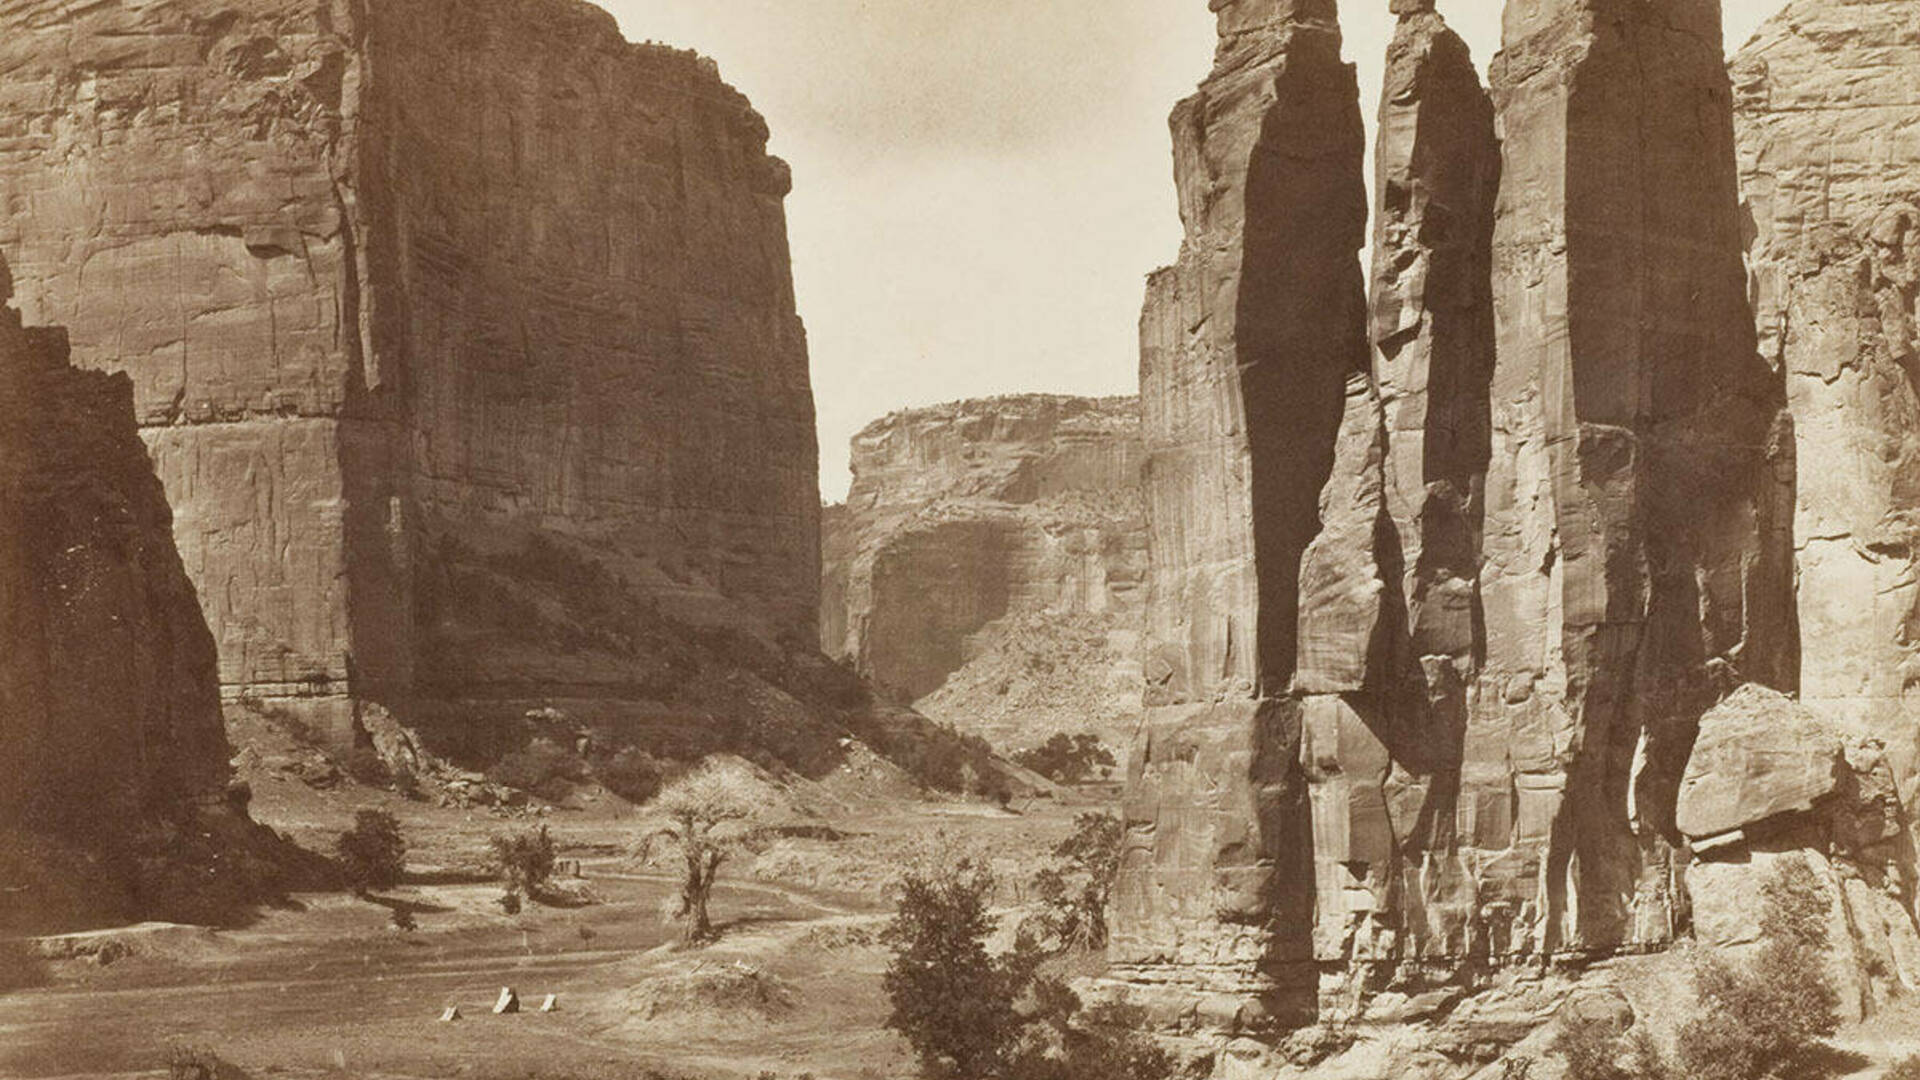 Timothy O'Sullivan (American, 1840–1882), Canon de Chelle, Walls of the Grand Canyon about 1200 feet in height, 1873, albumen silver print on board. Acquired with funds provided by the Humana Foundation Endowment for American Art, 1994.003.001